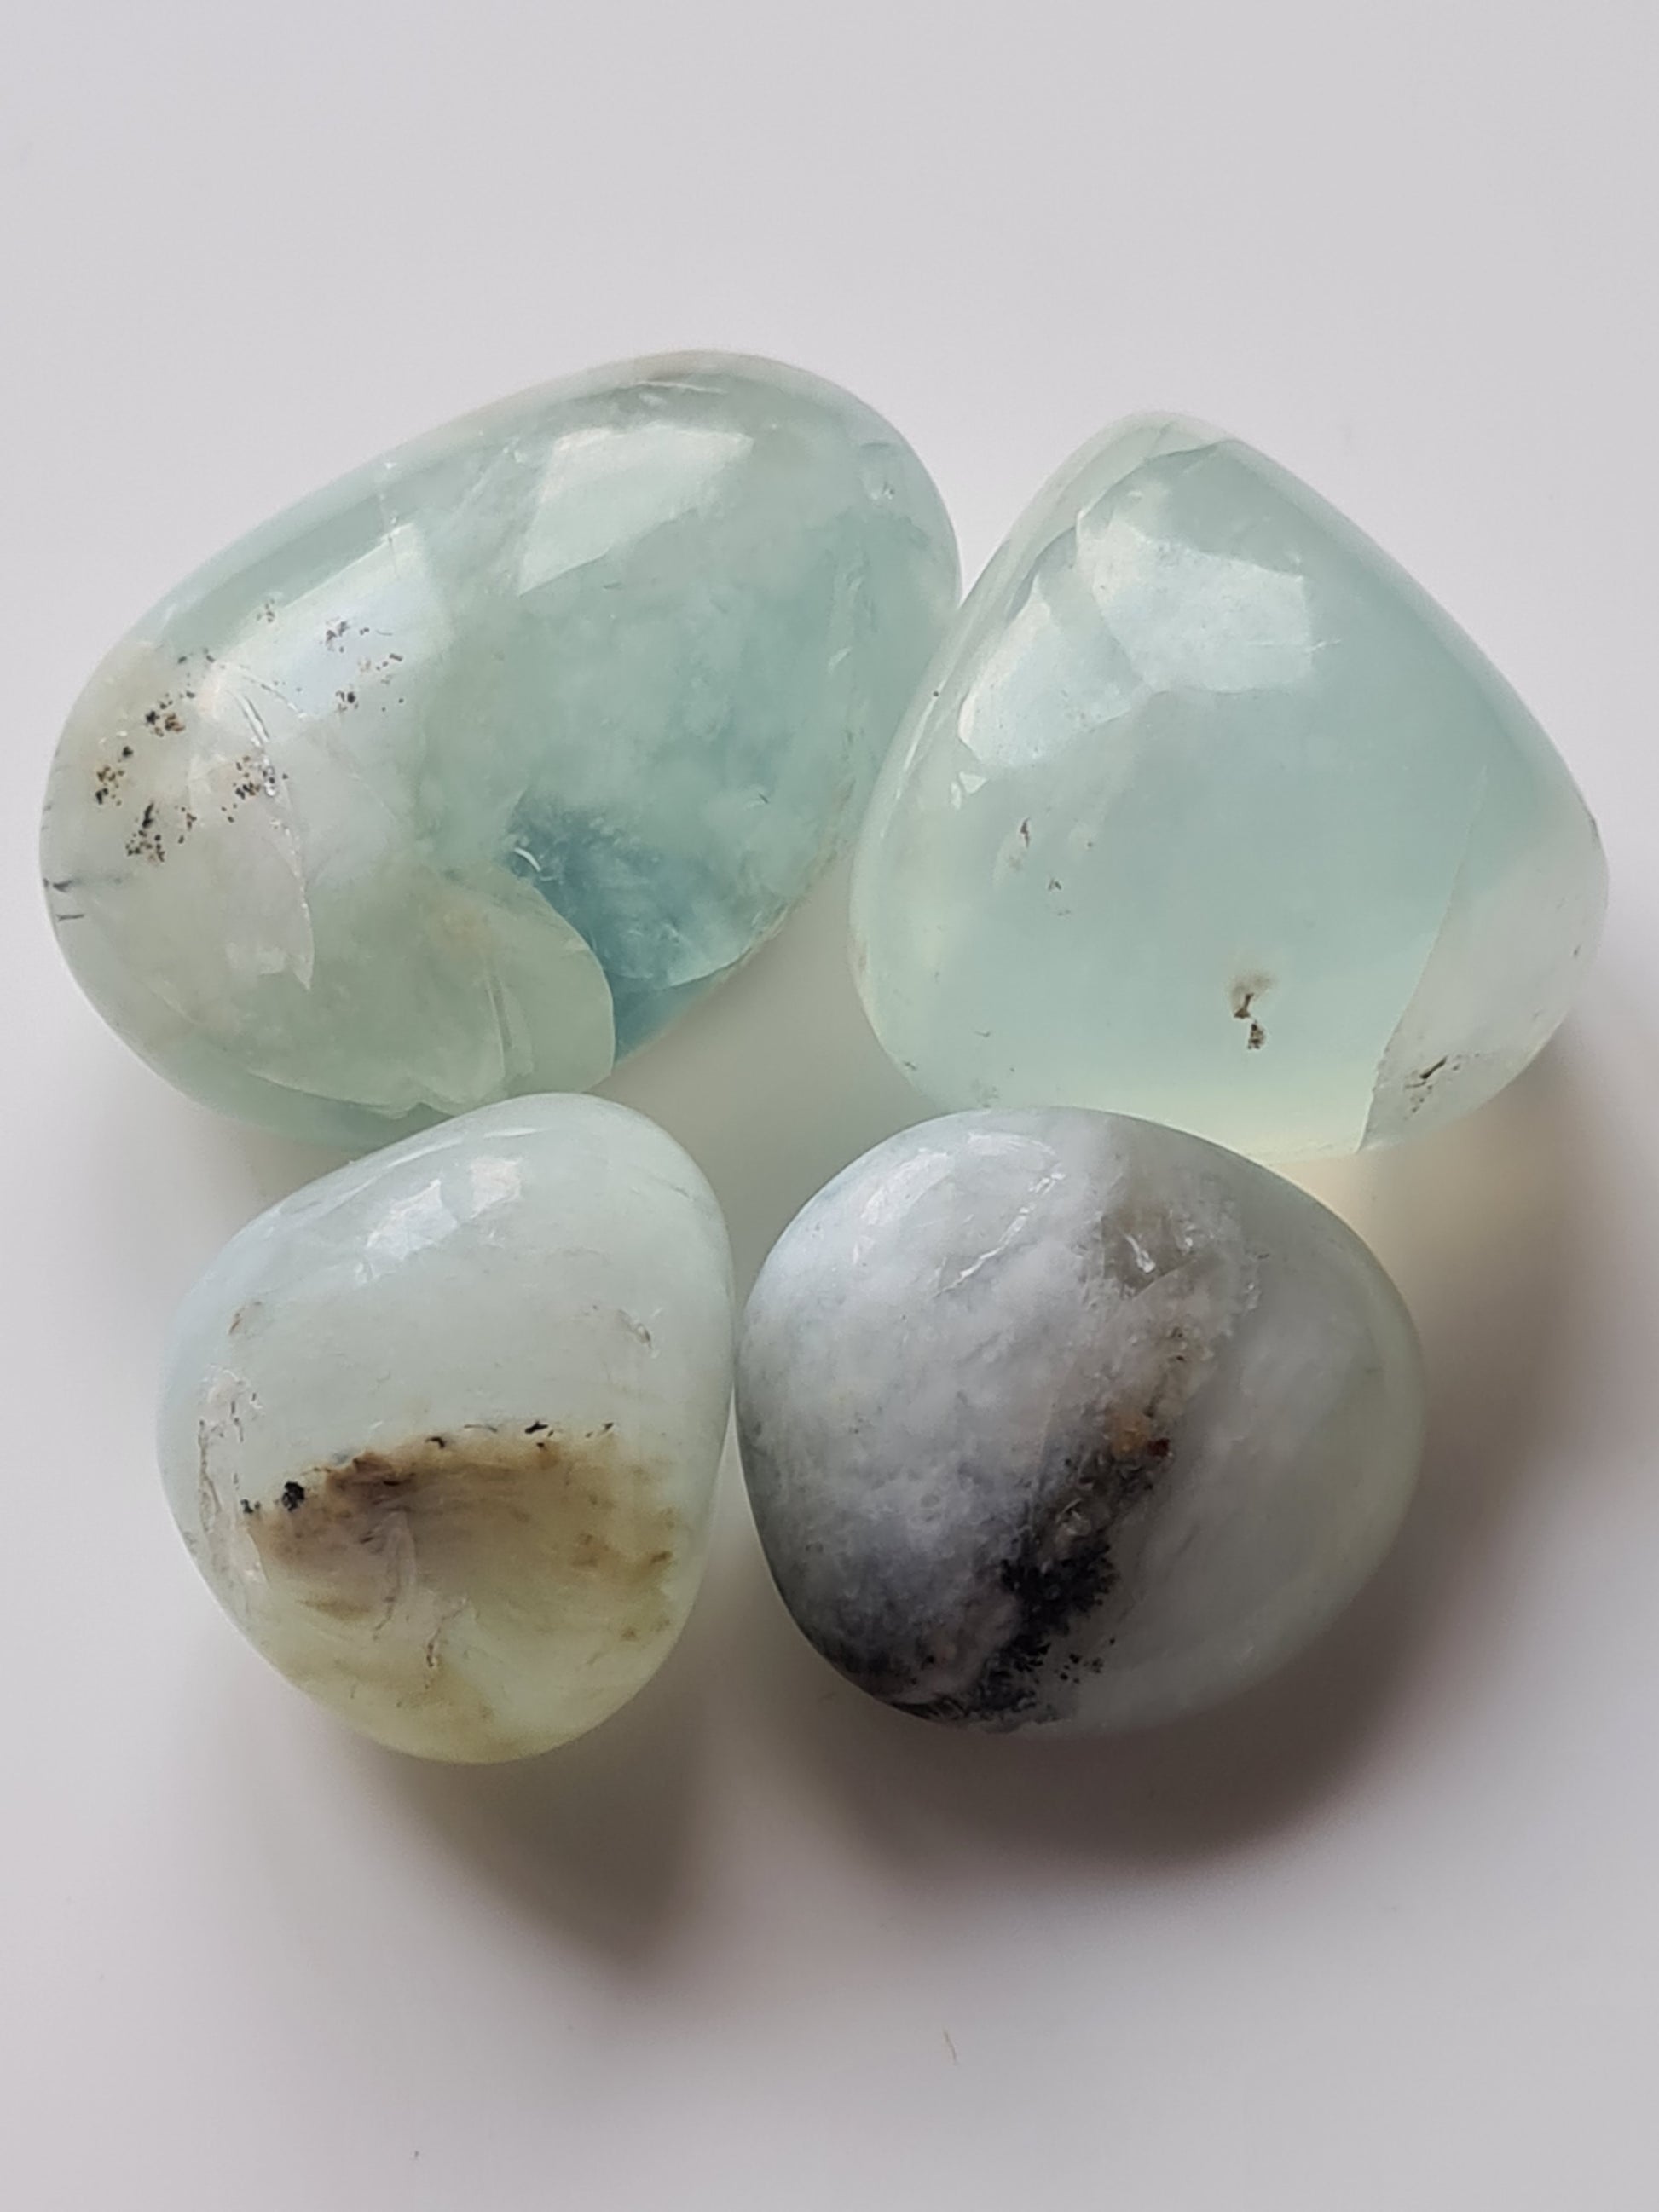 Blue Opal Tumbles from Peru. They are found at the base on Andean Mountains and bring a calming peaceful energy.